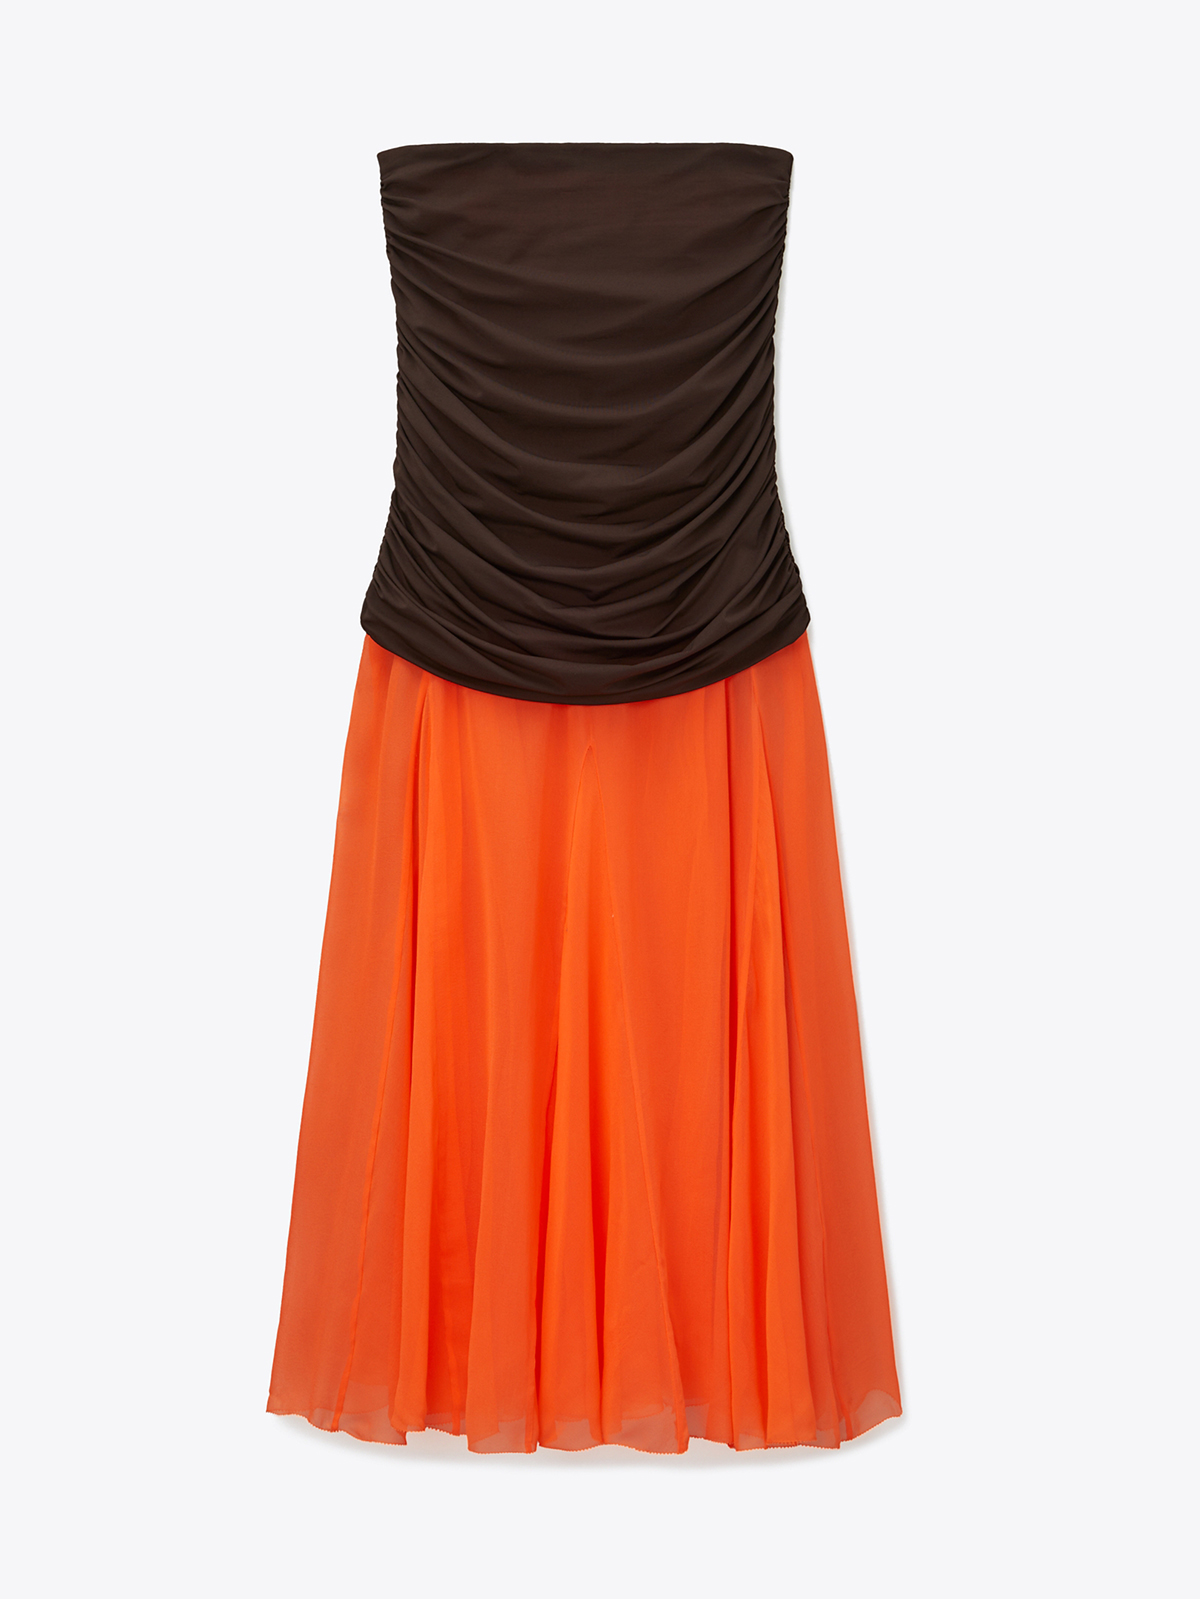 Tory Burch brown-and-orange tiered skirt